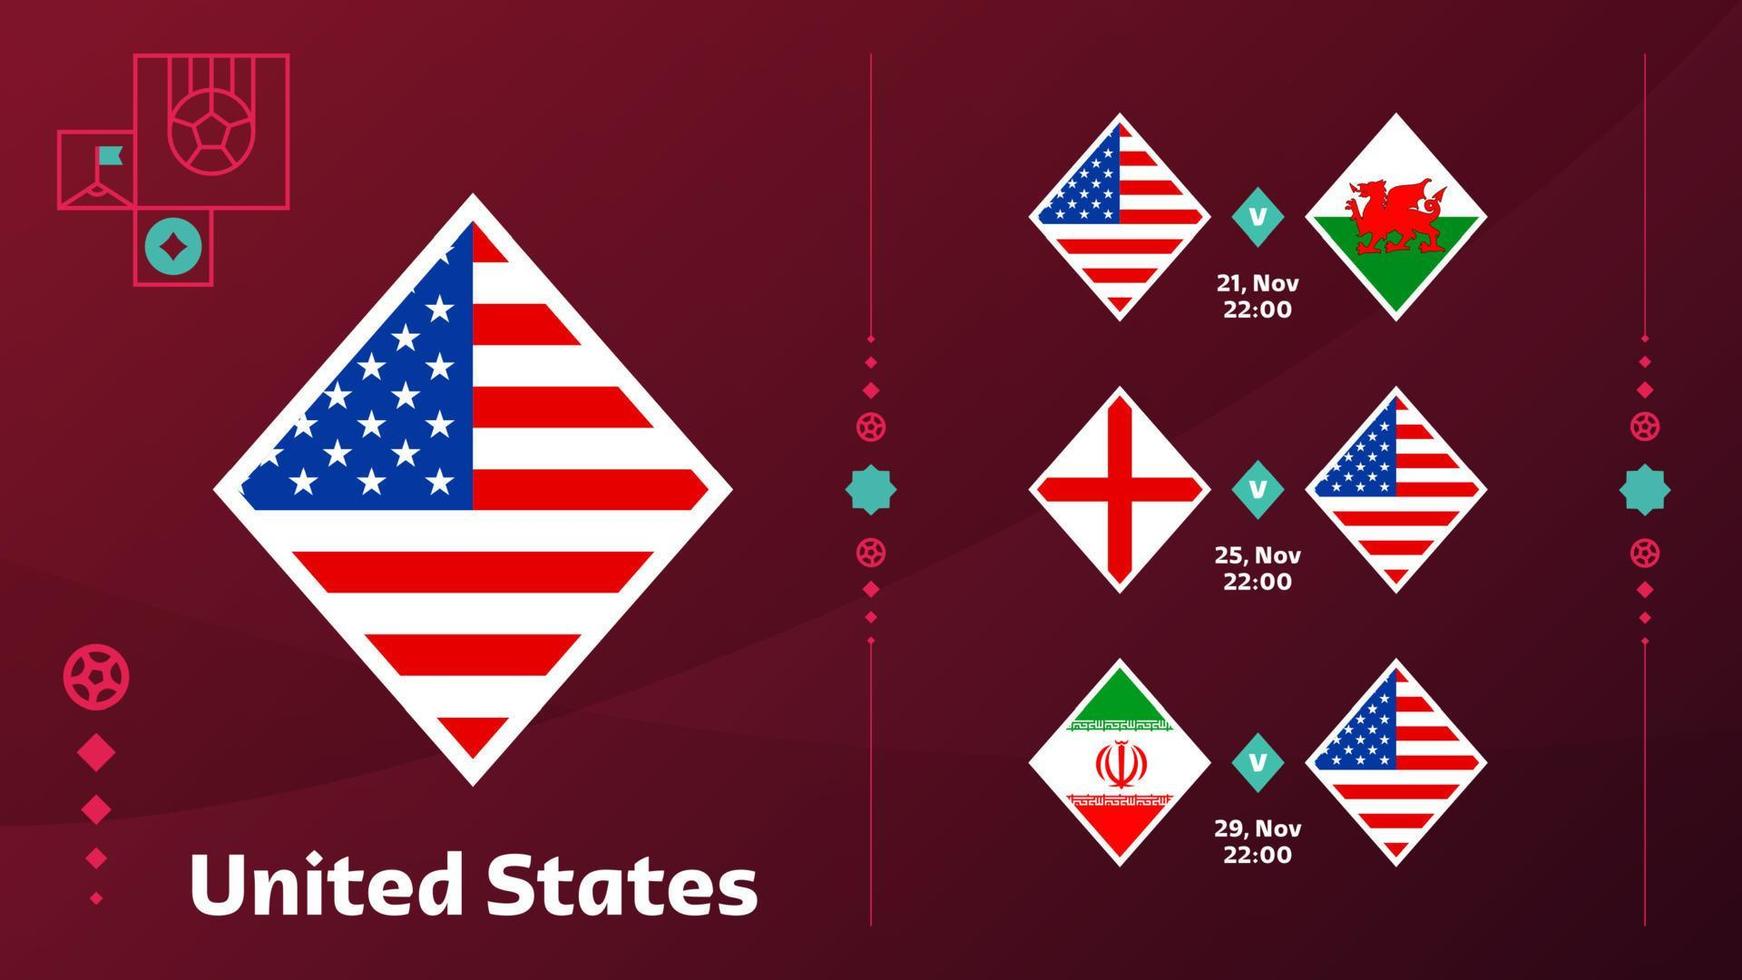 united states national team Schedule matches in the final stage at the 2022 Football World Championship. Vector illustration of world football 2022 matches.